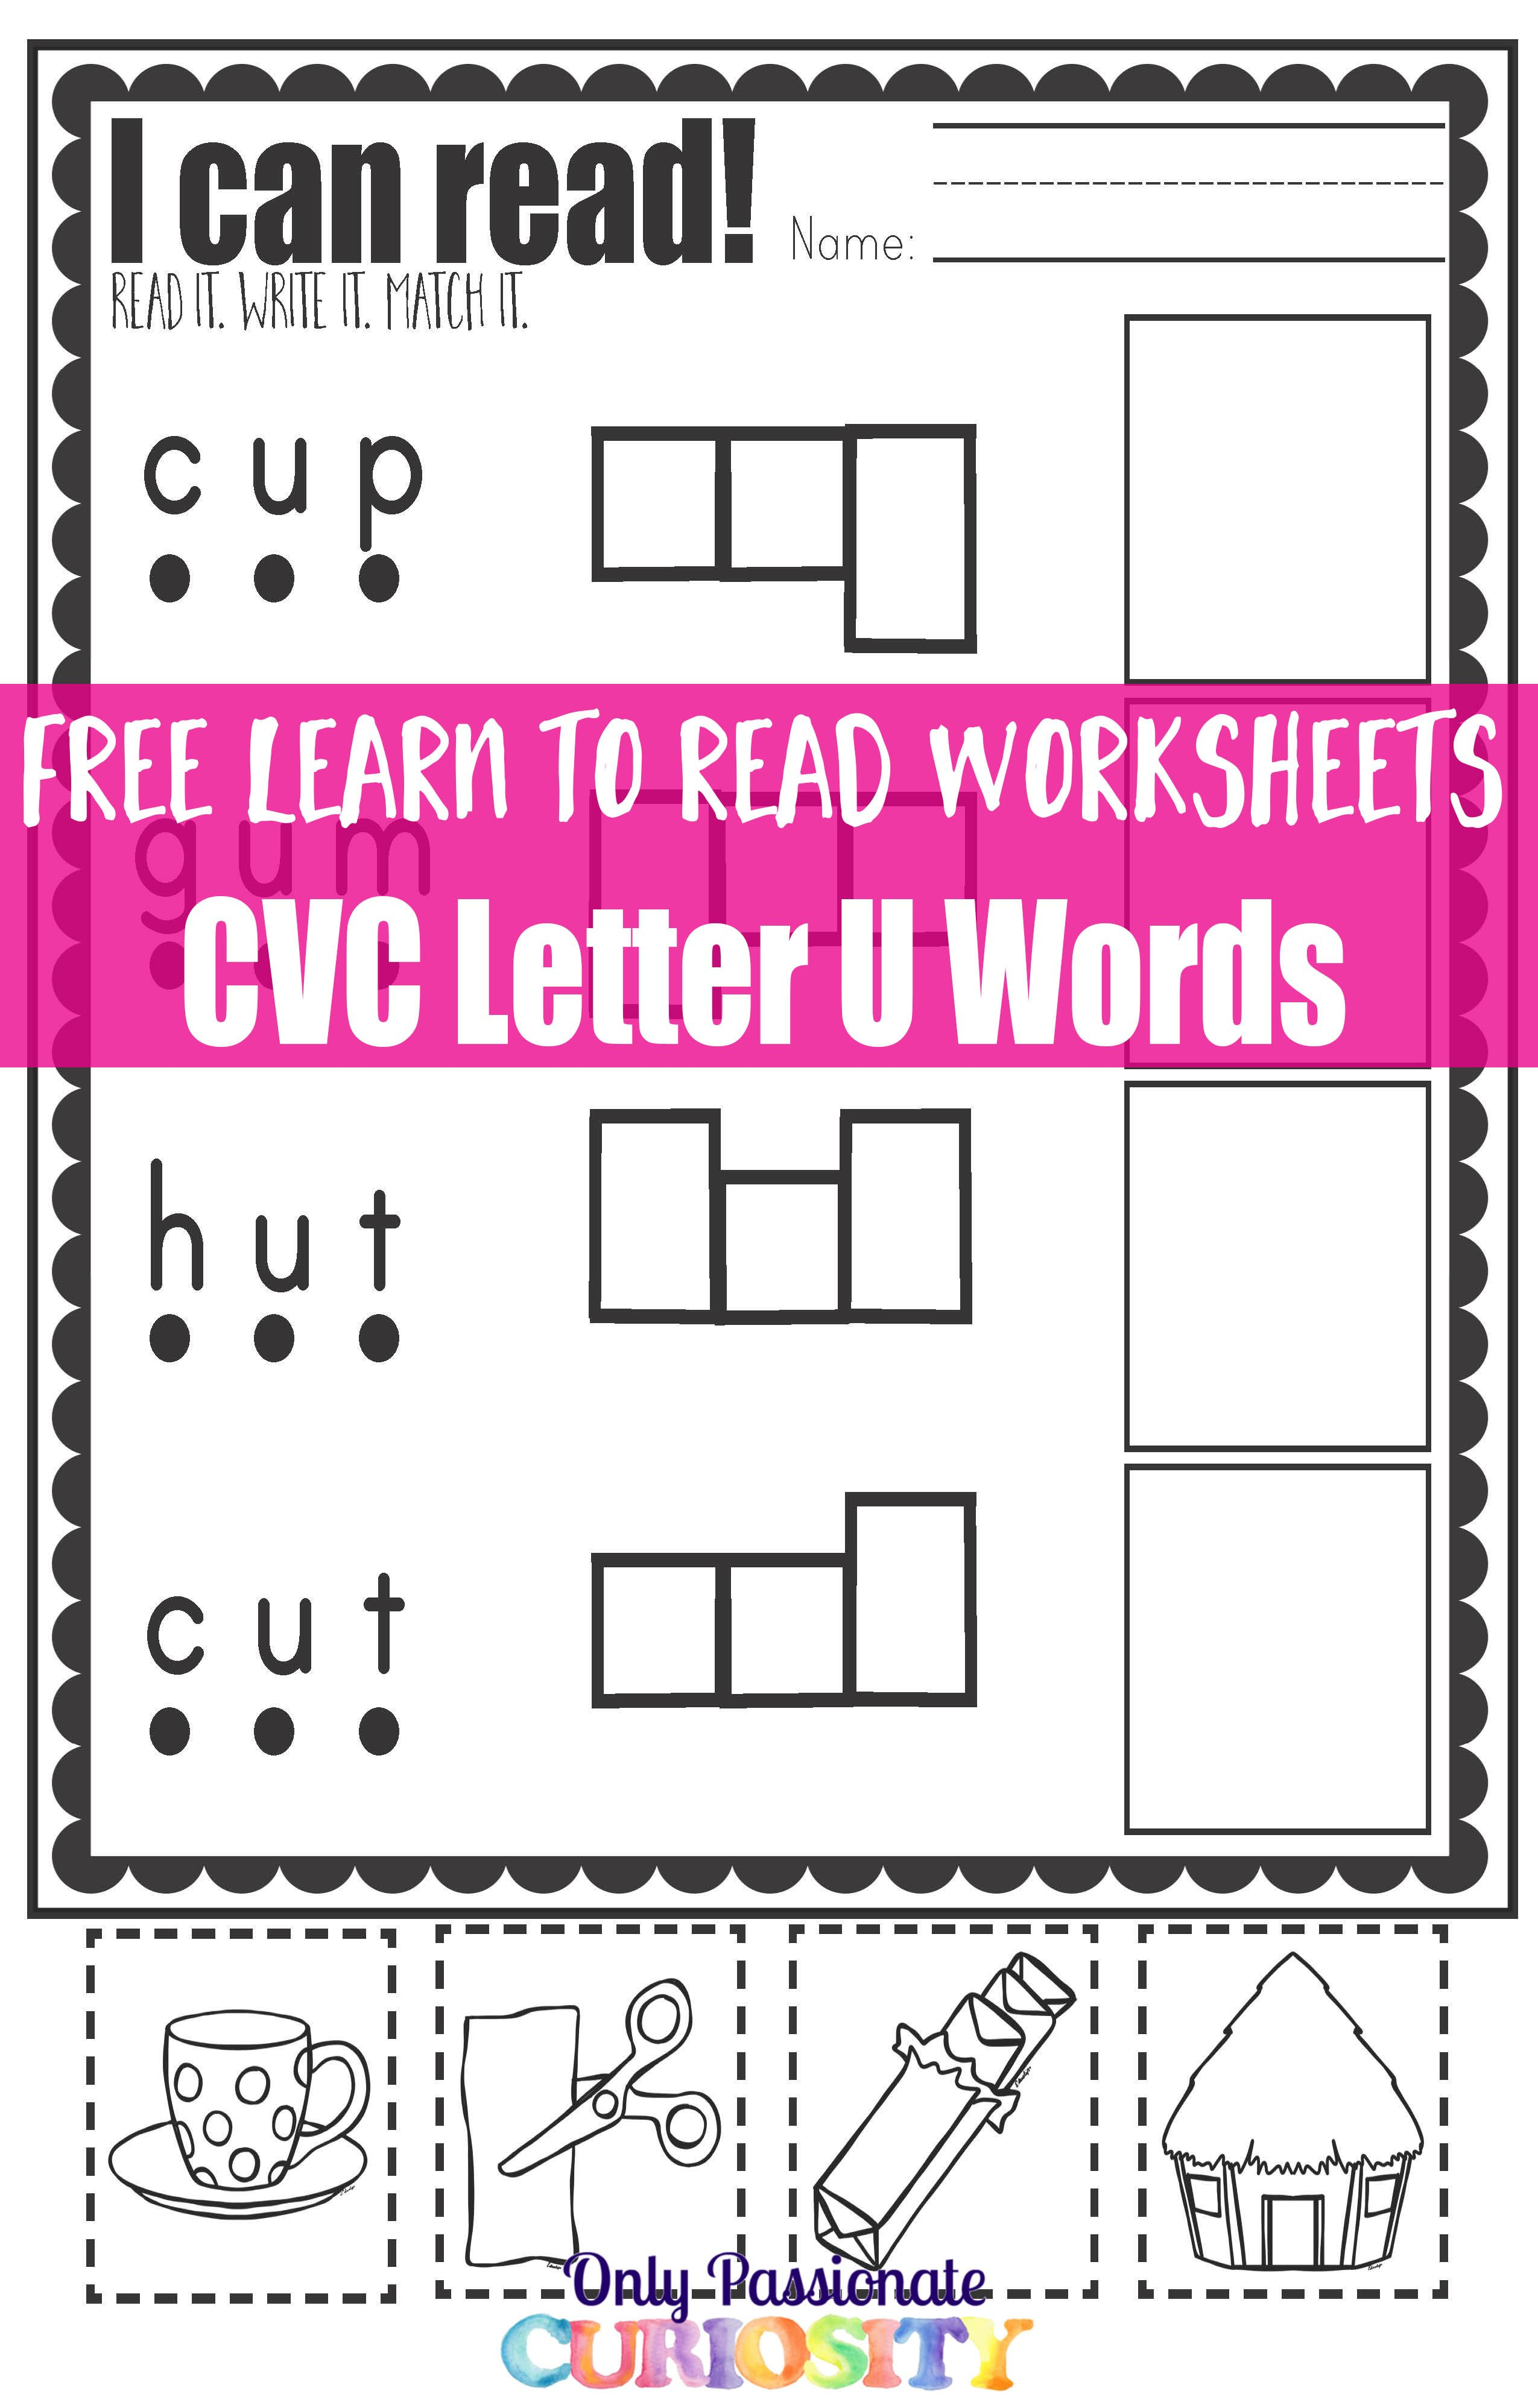 Cvc Worksheets Cut And Paste Letter U  Only Passionate Curiosity Inside Cut And Paste Alphabet Worksheets